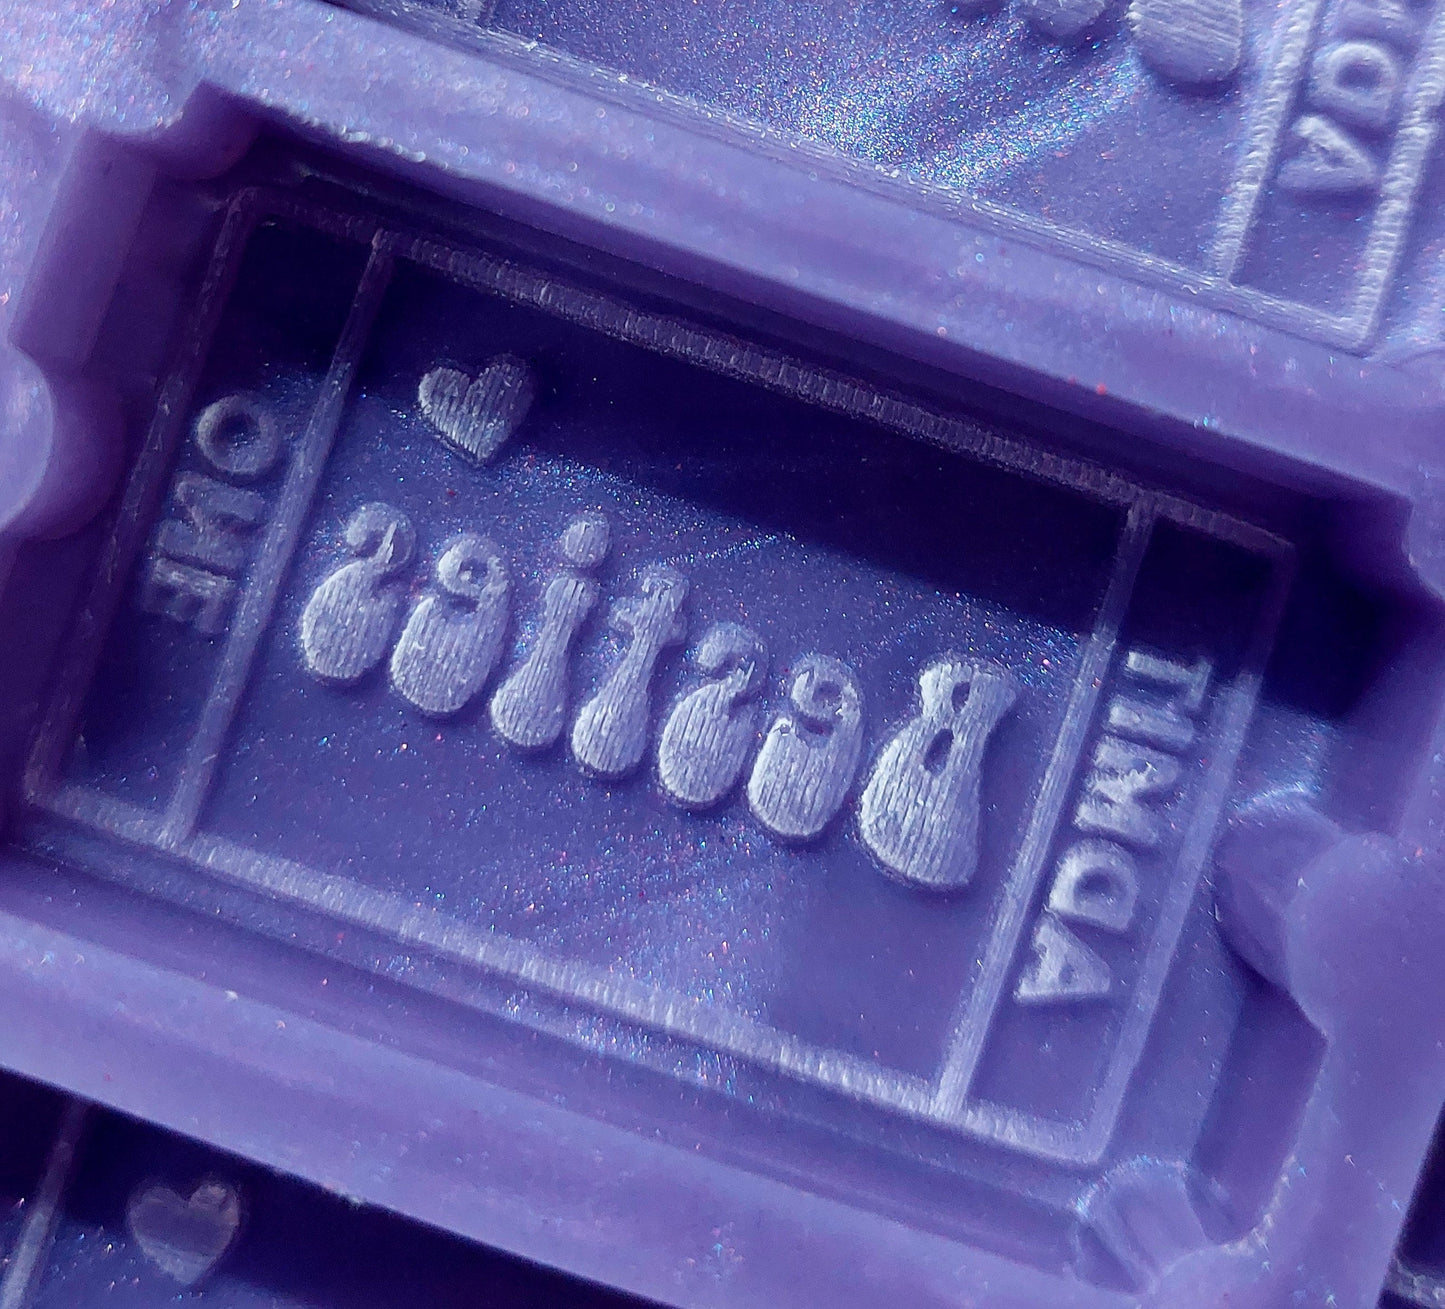 Besties 8 Cell Ticket Silicone Mould for wax, resin, soap etc